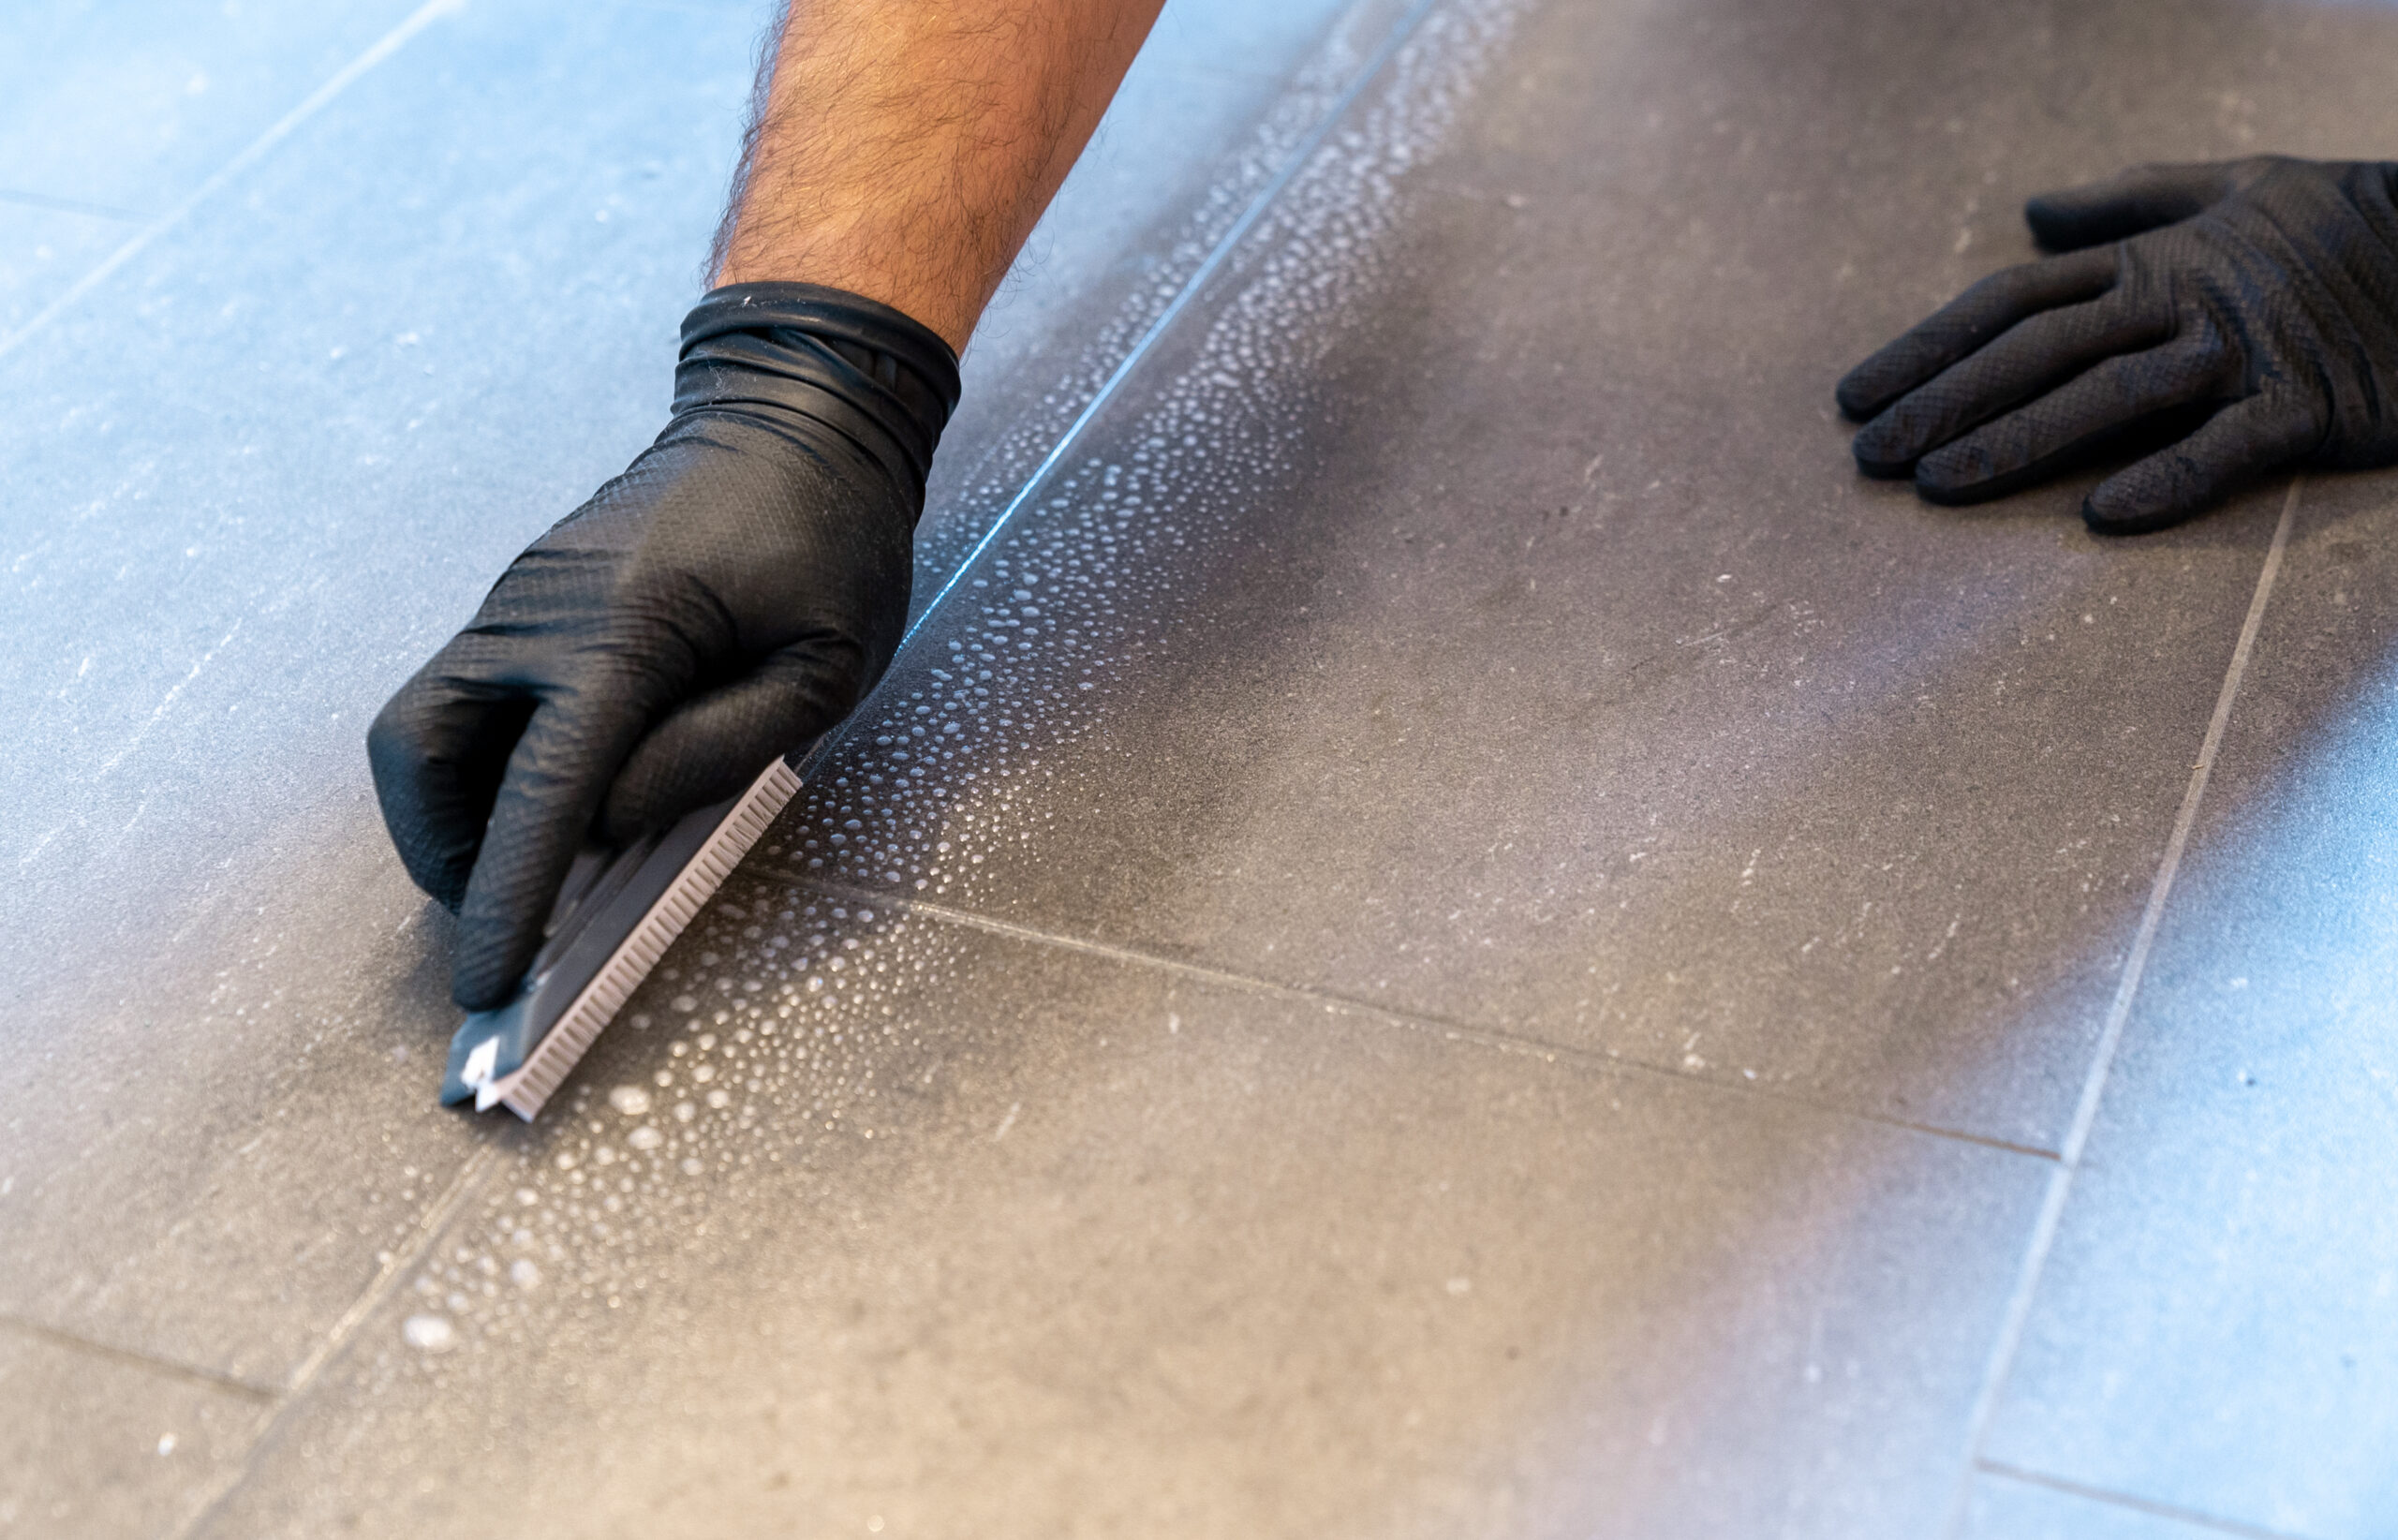 How to Properly Choose & Clean Grout